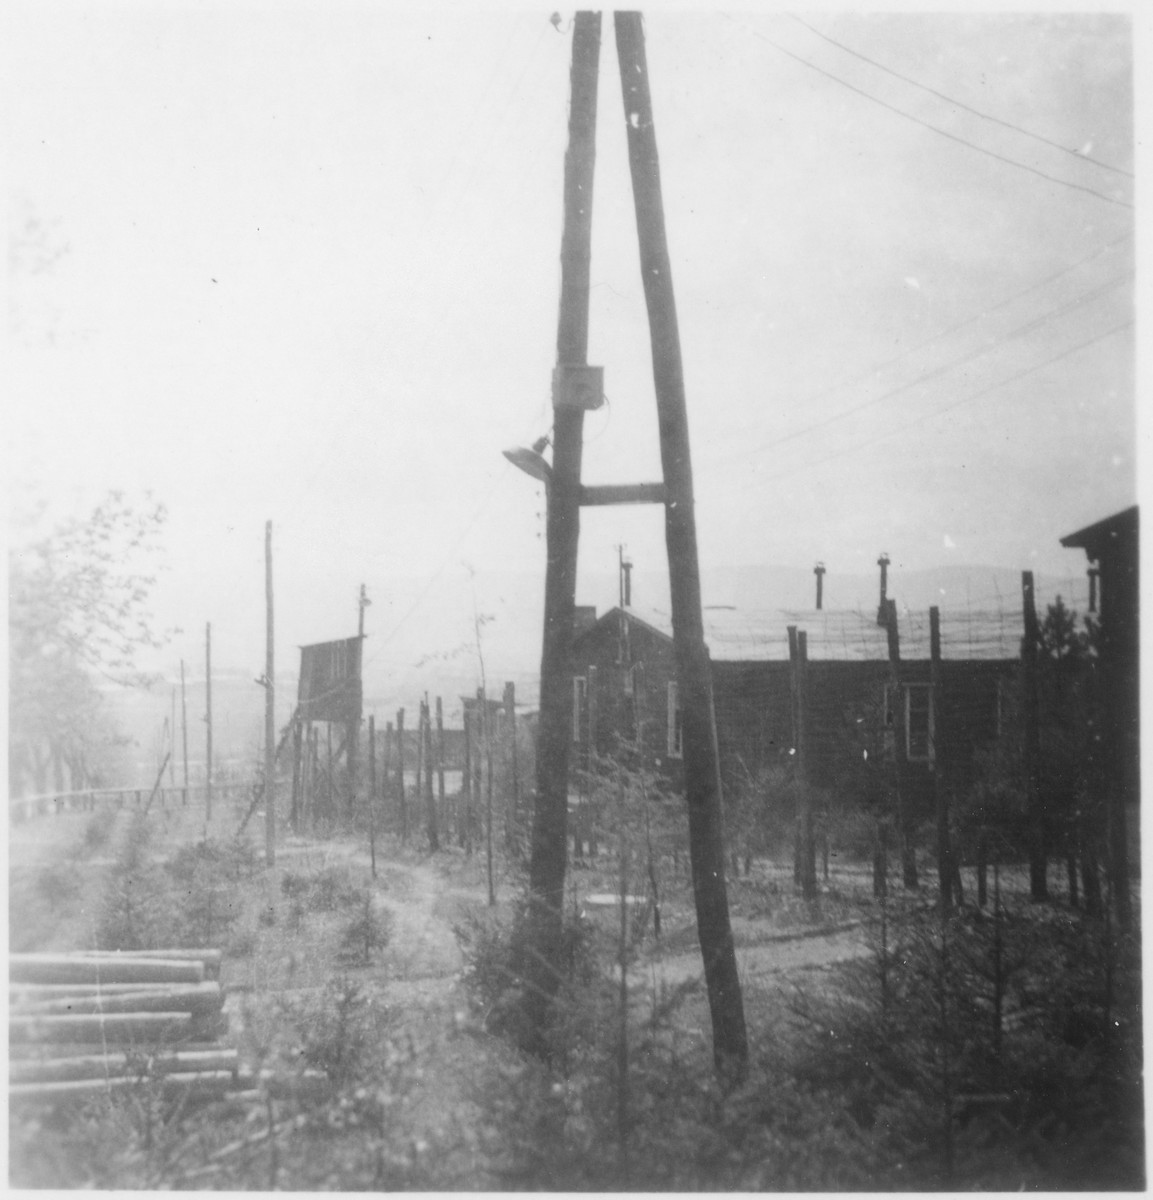 View of a guard tower and the barbed-wire fence that enclosed the Ohrdruf concentration camp.